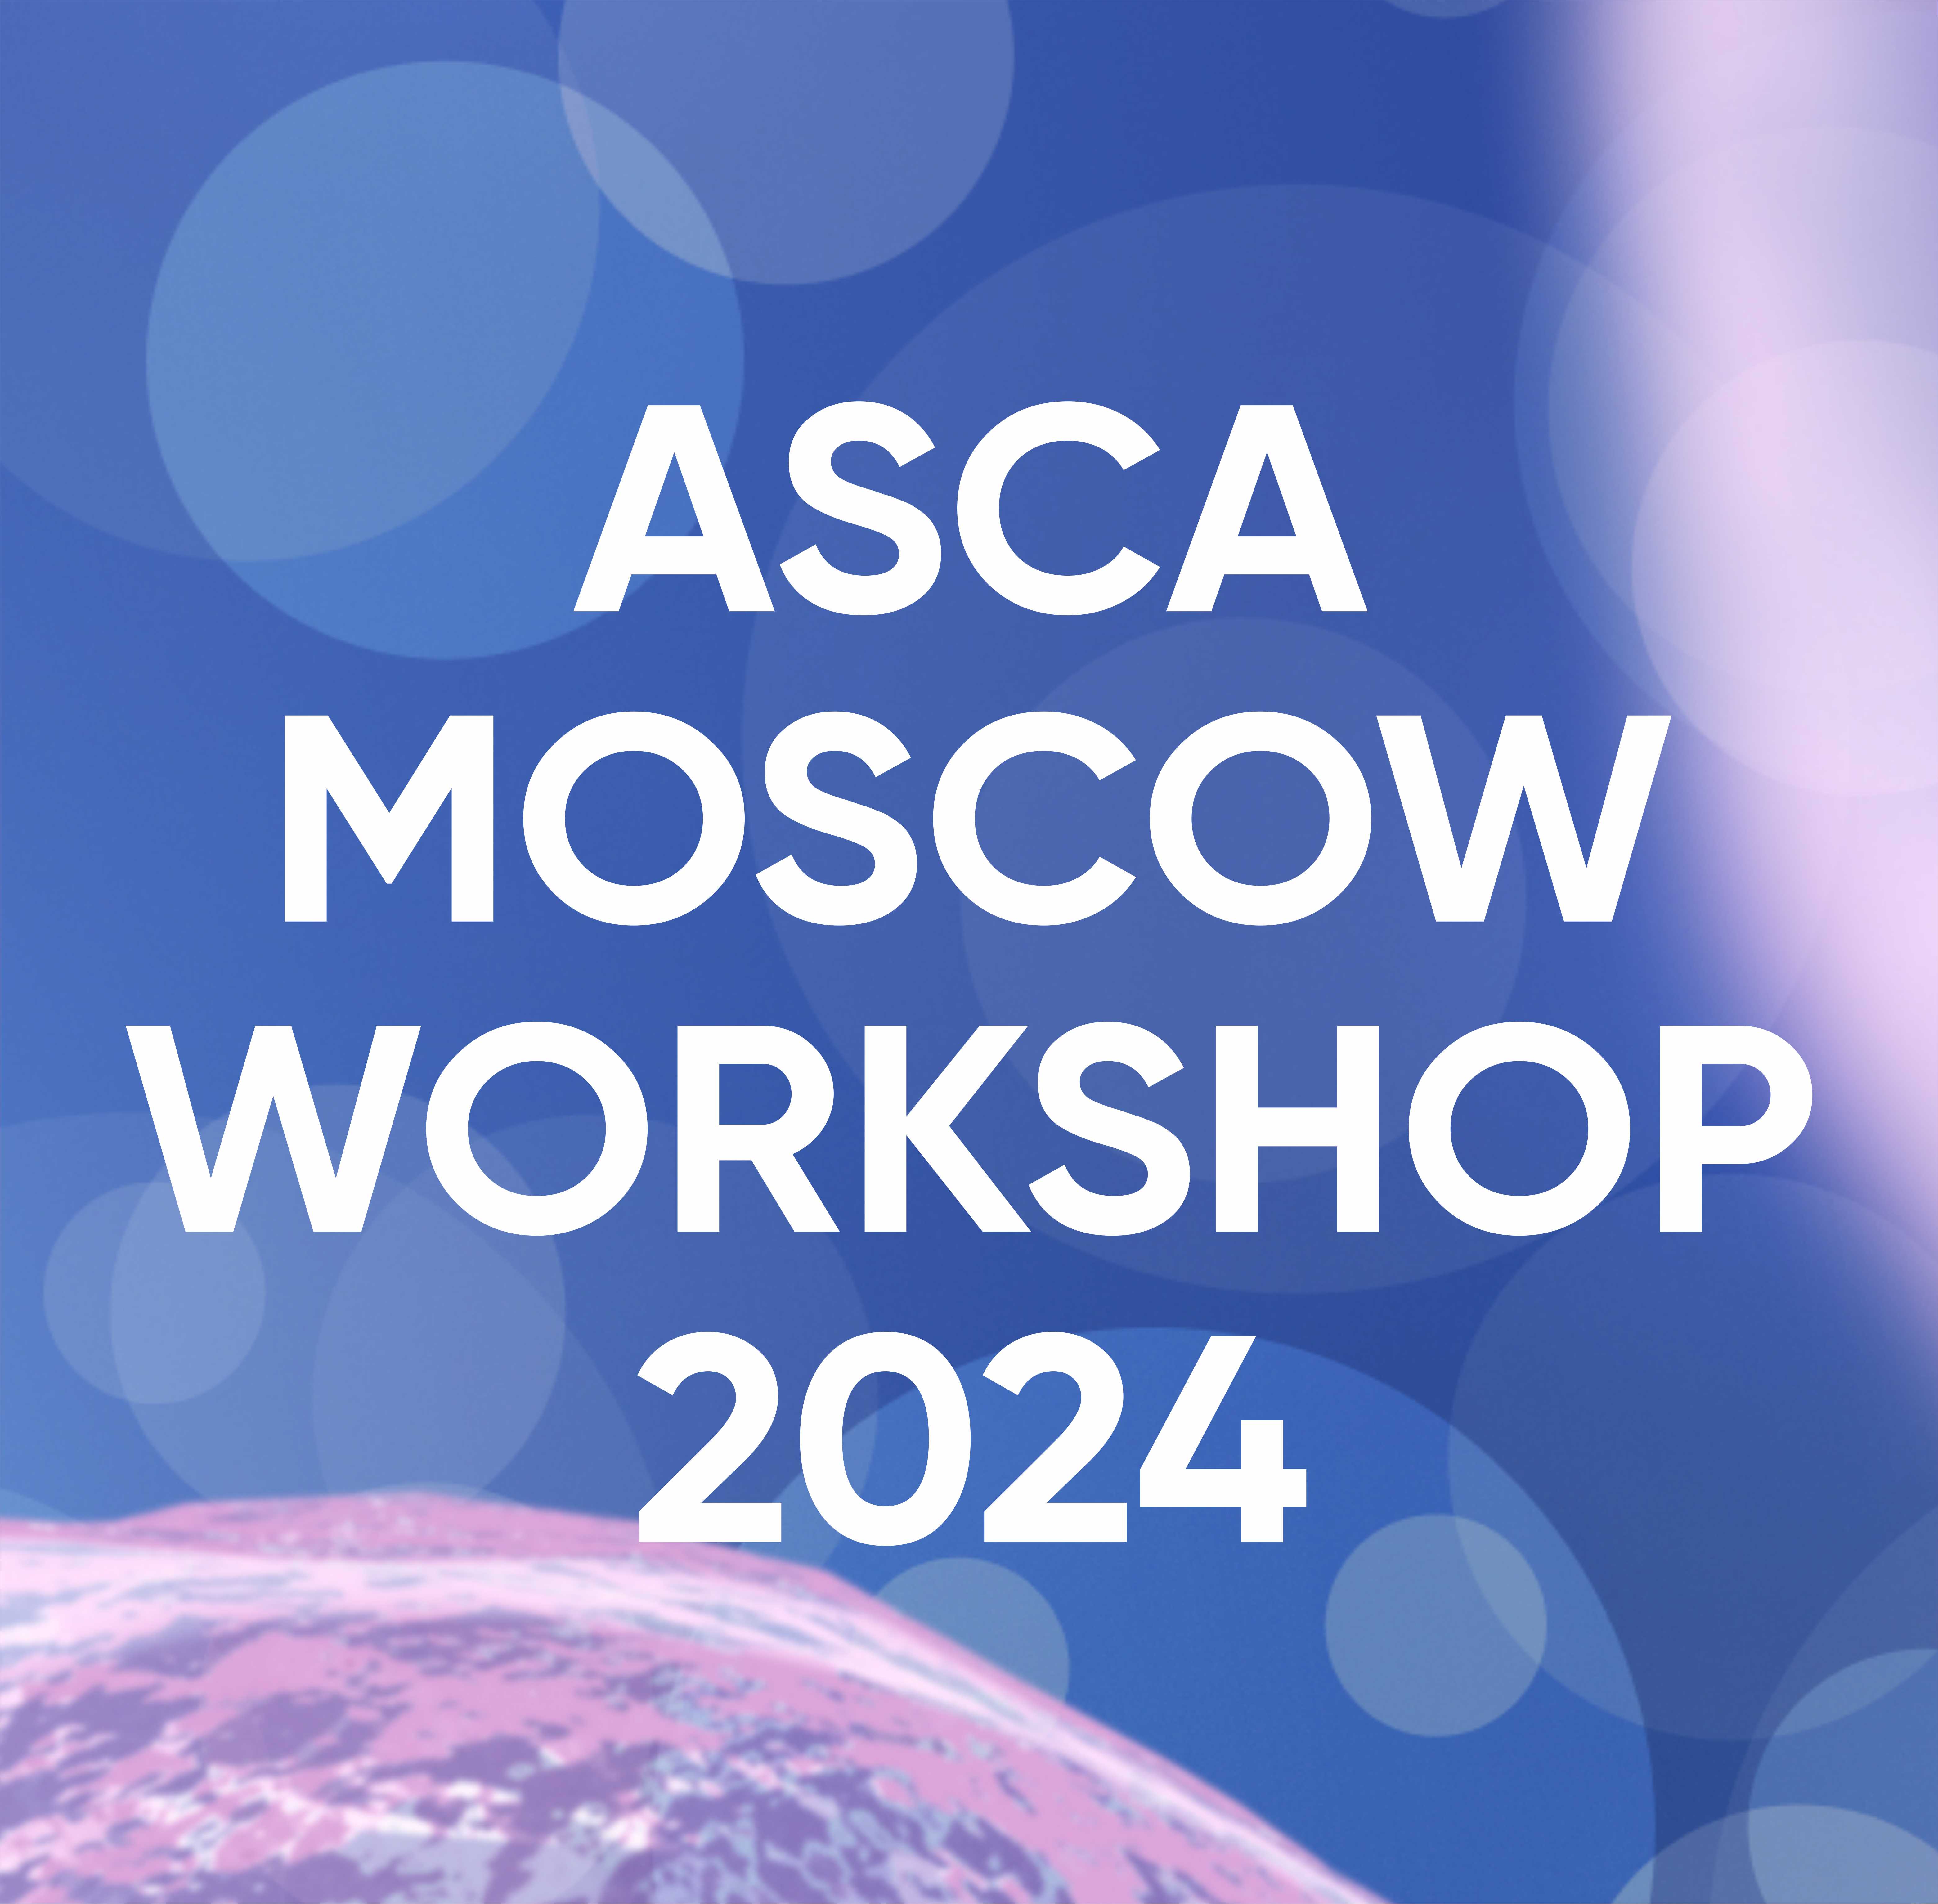 ASCA Moscow Workshop 2024